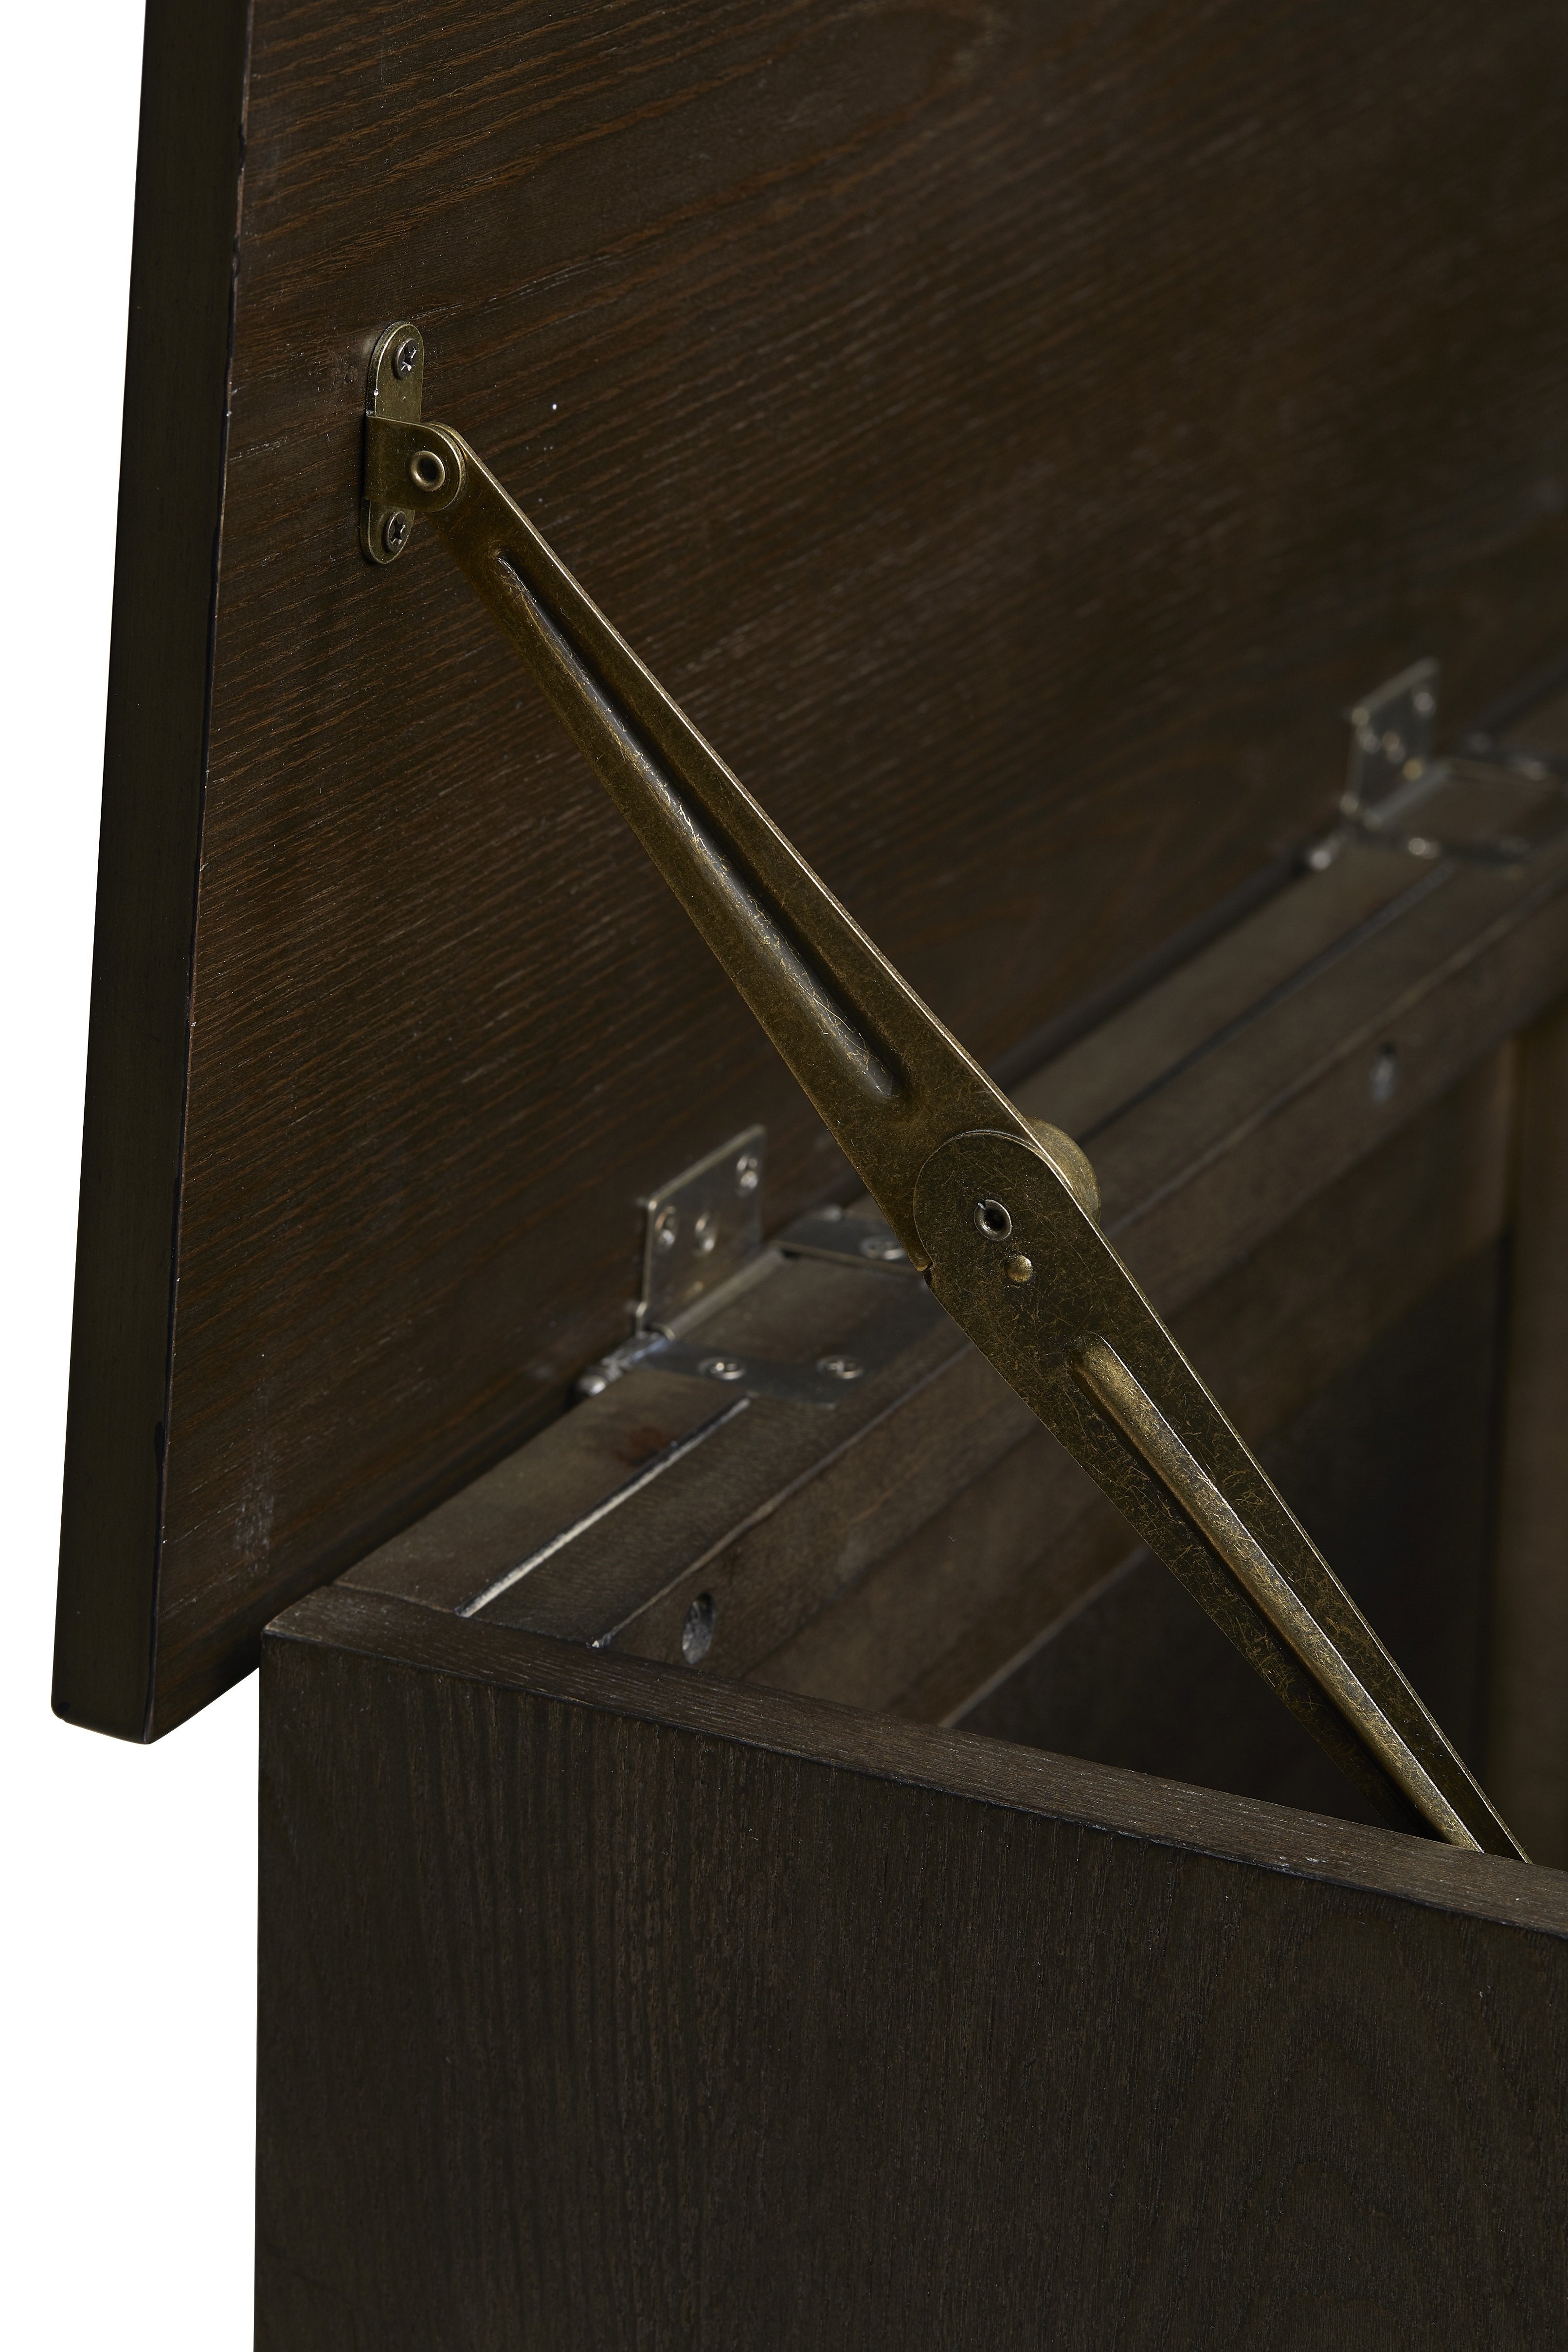 Elevate 72014 Rustic TV Lift Cabinet for 50” TV’s detail shot.